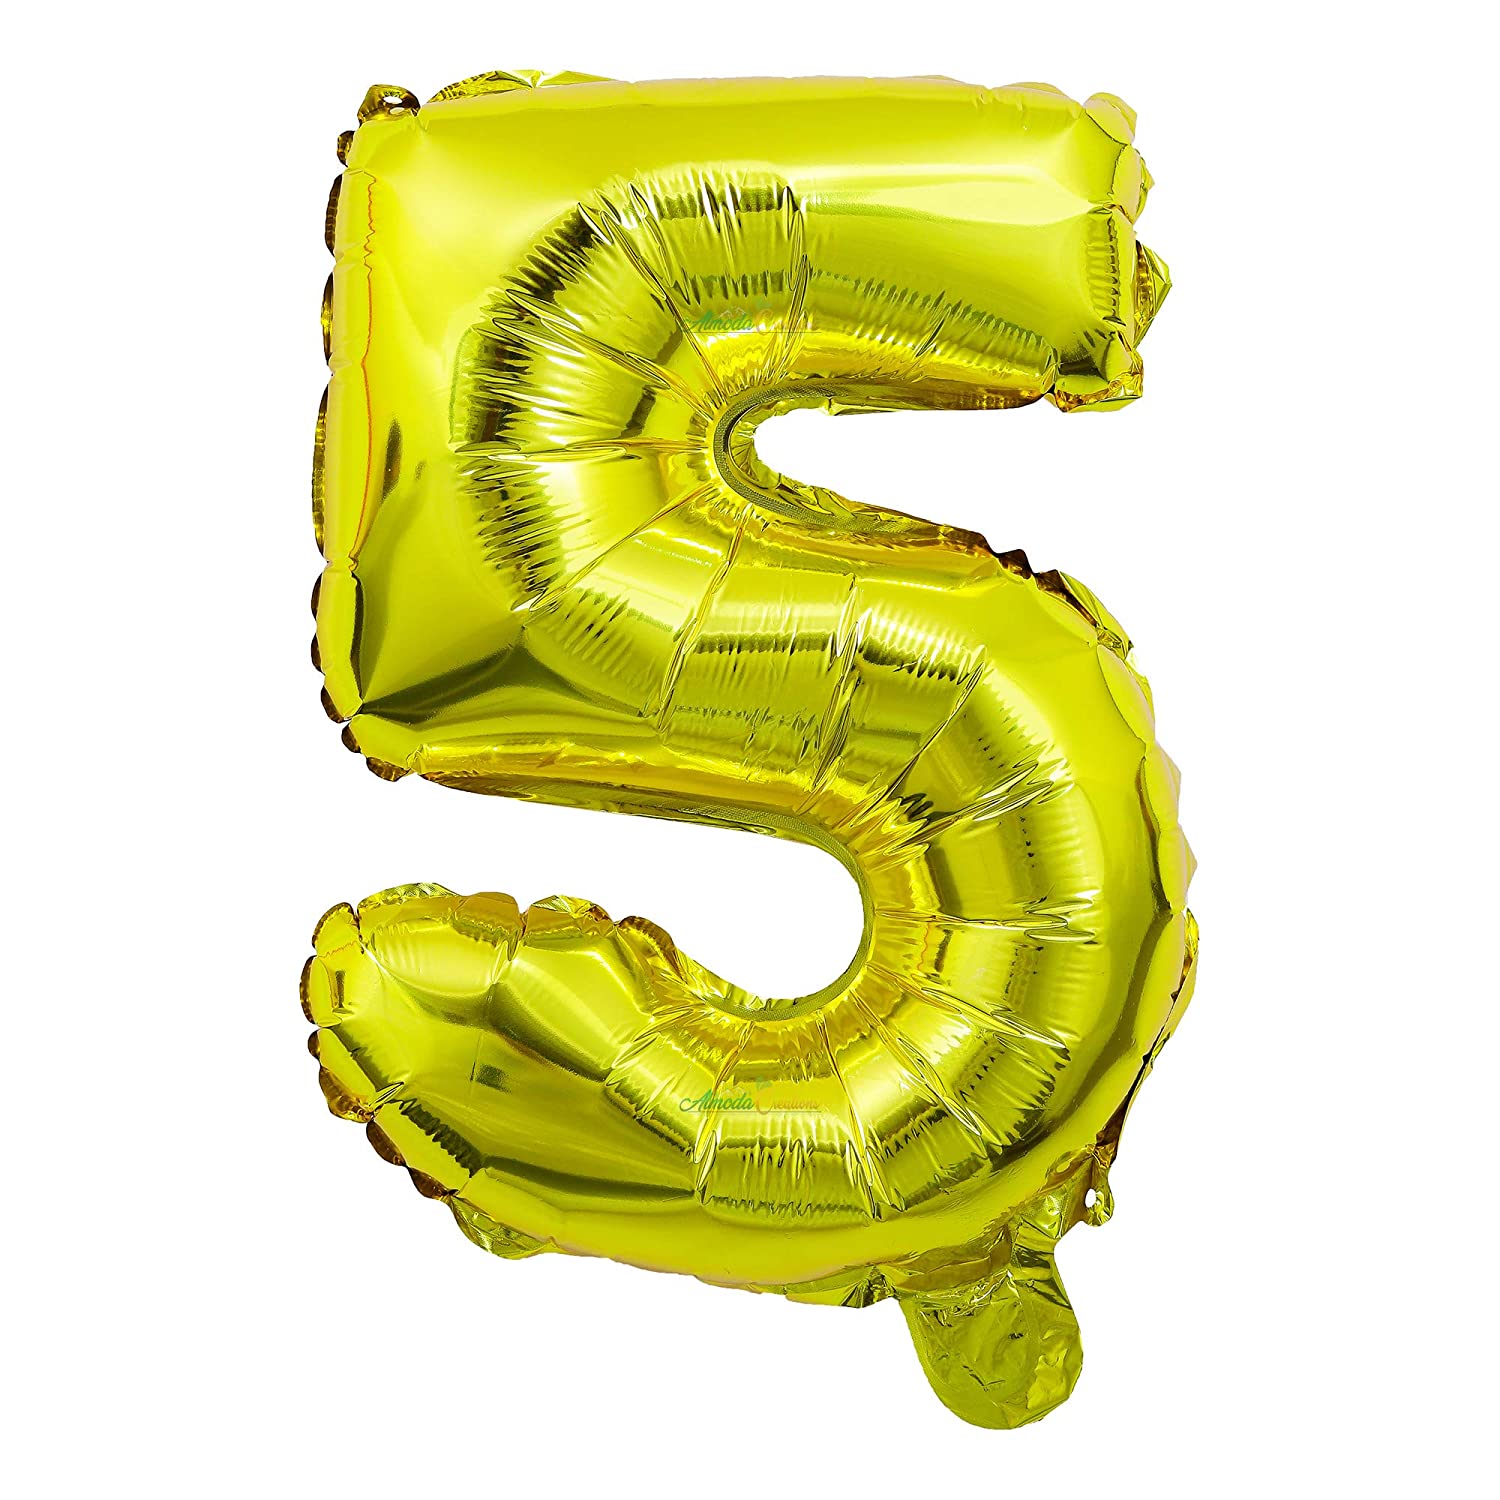 32 Inches Number Foil Balloon, Gold Color, Number 5